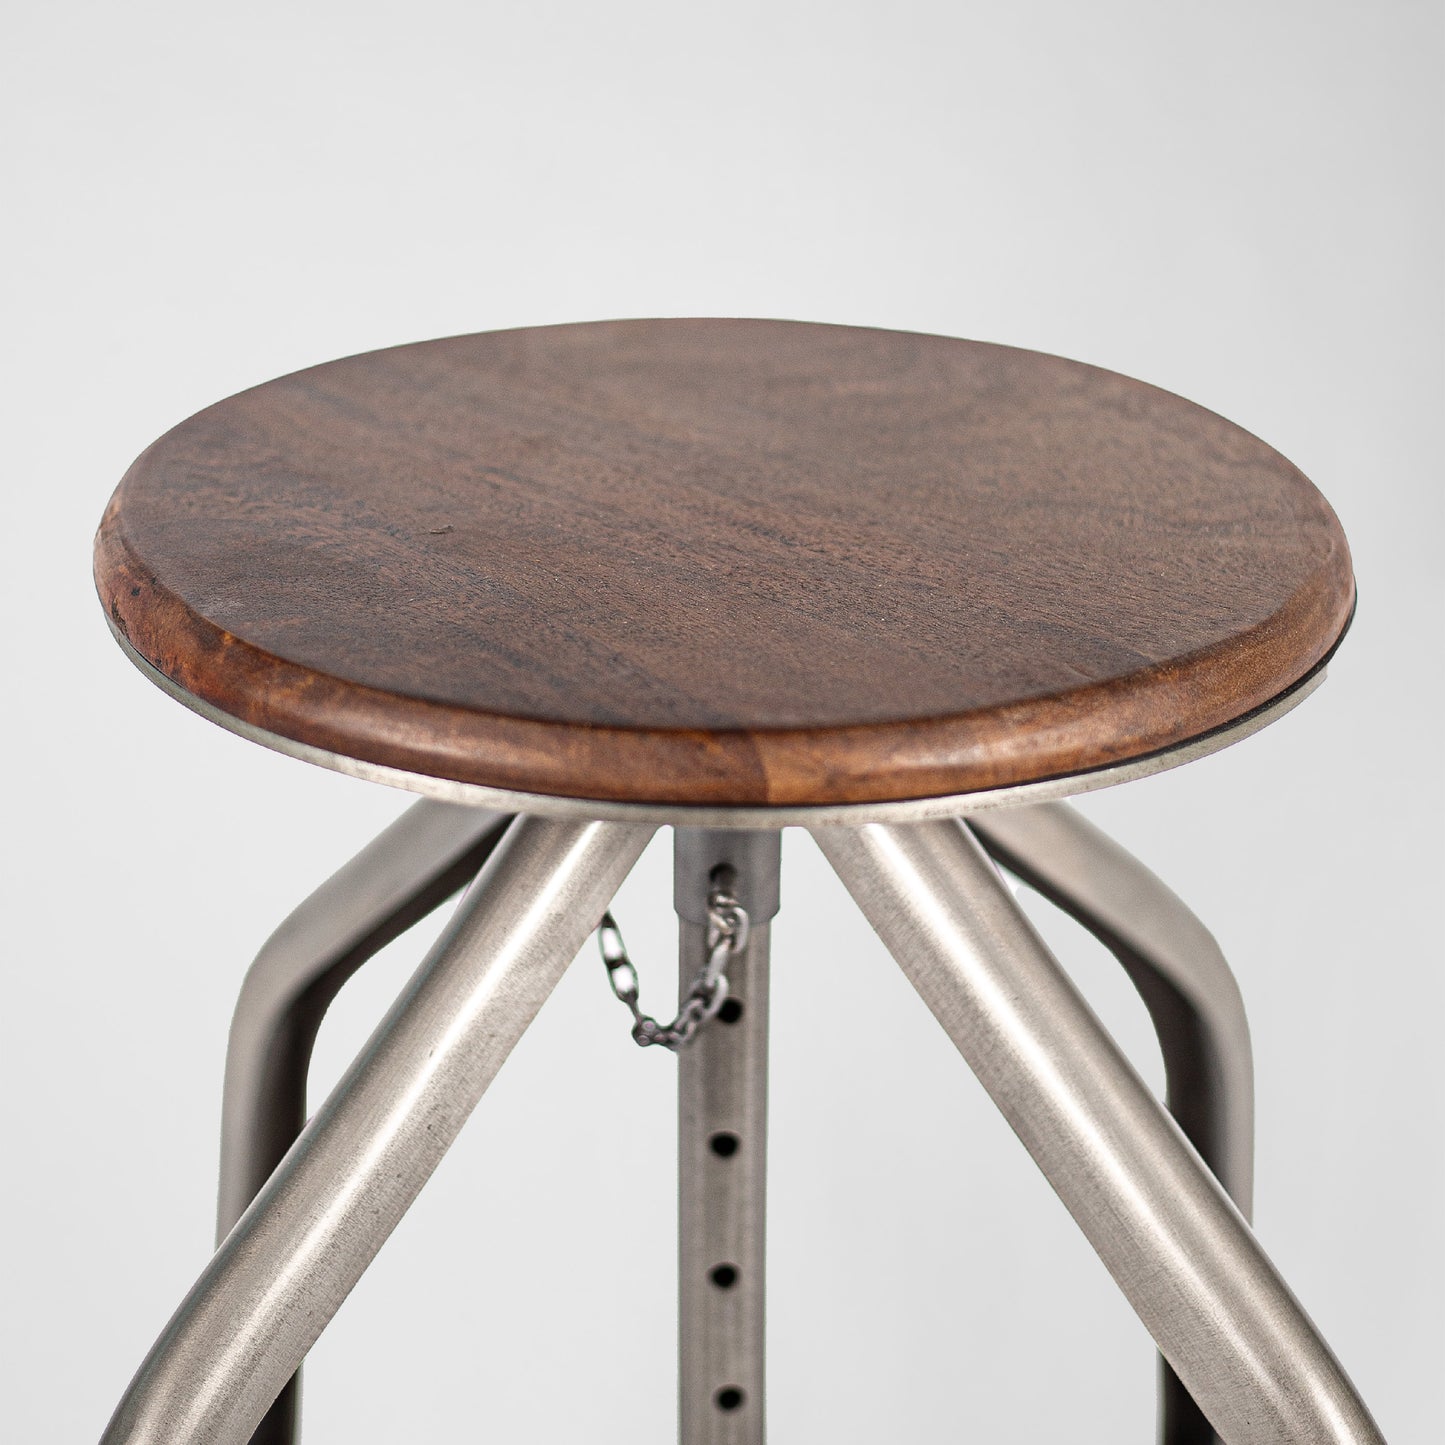 Humphrey Pump – Handmade industrial design stool made of metal with wooden seat in silver